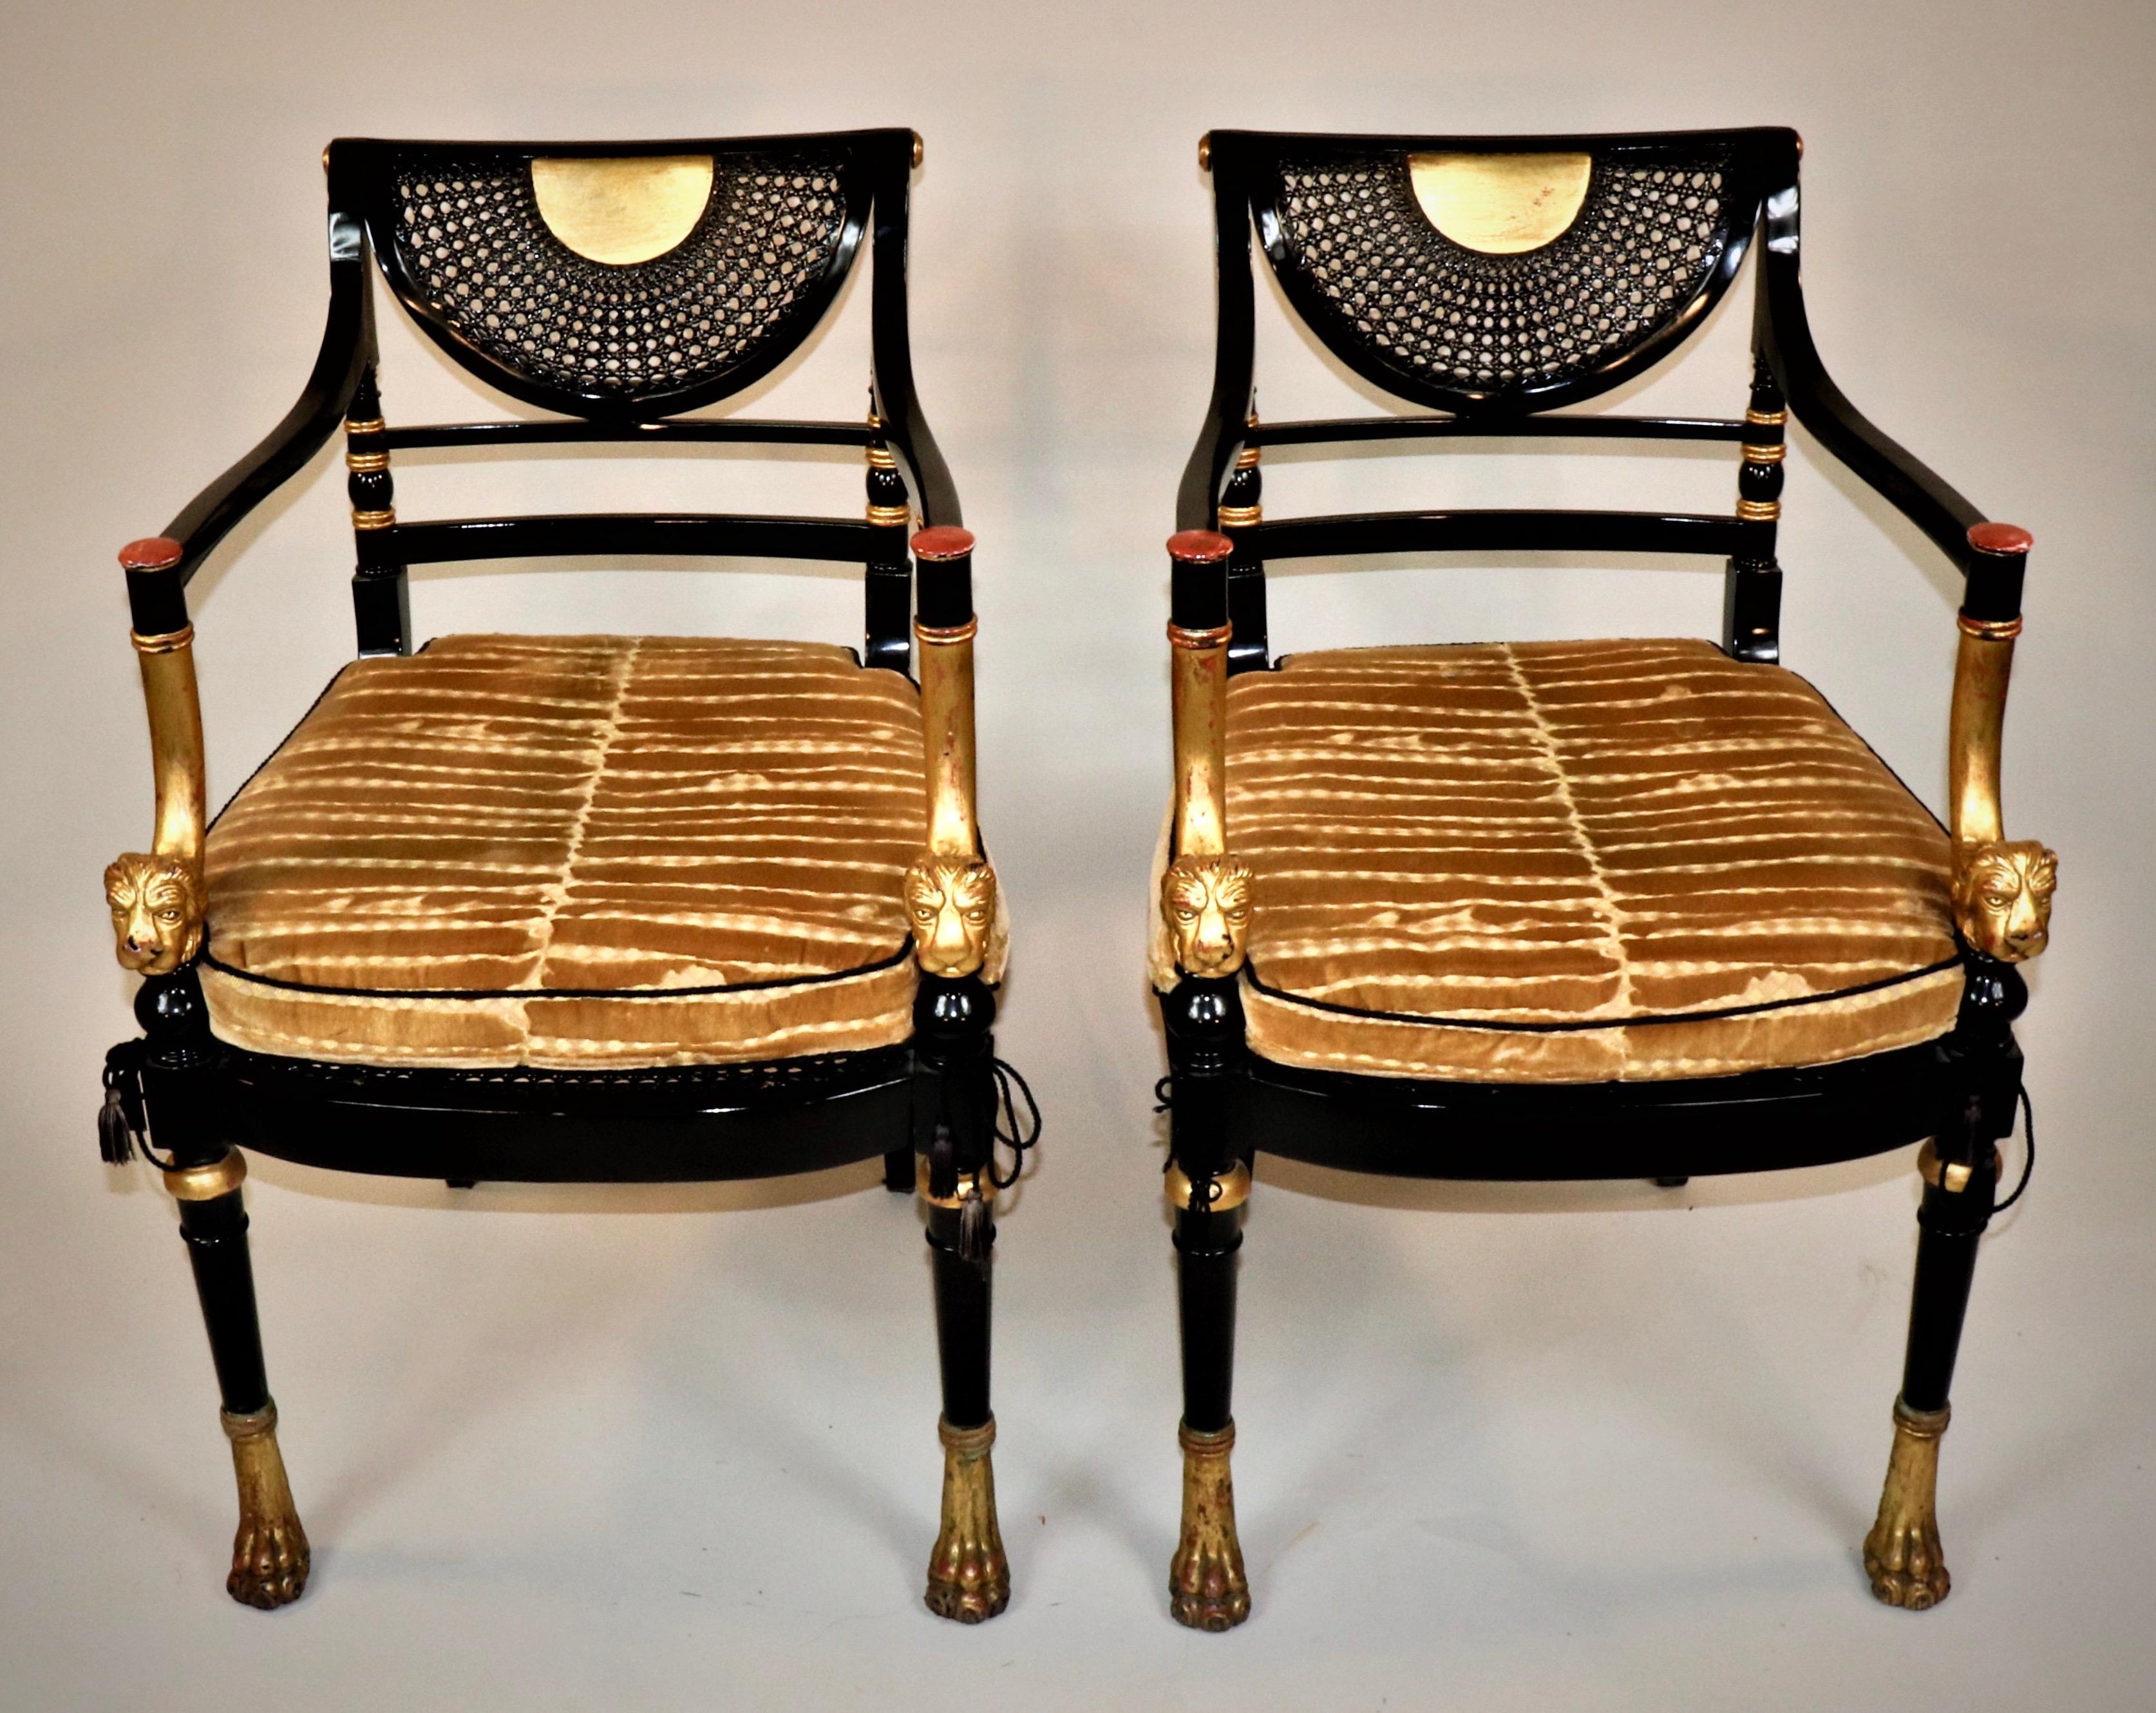 This marvelous set of 12 Circa 1910 Empire style black lacquered and gilded chairs consists of two armchairs and ten regular side chairs. The backs have intricate fans of cane work with gold accents for vibrancy. The caned seats have also been